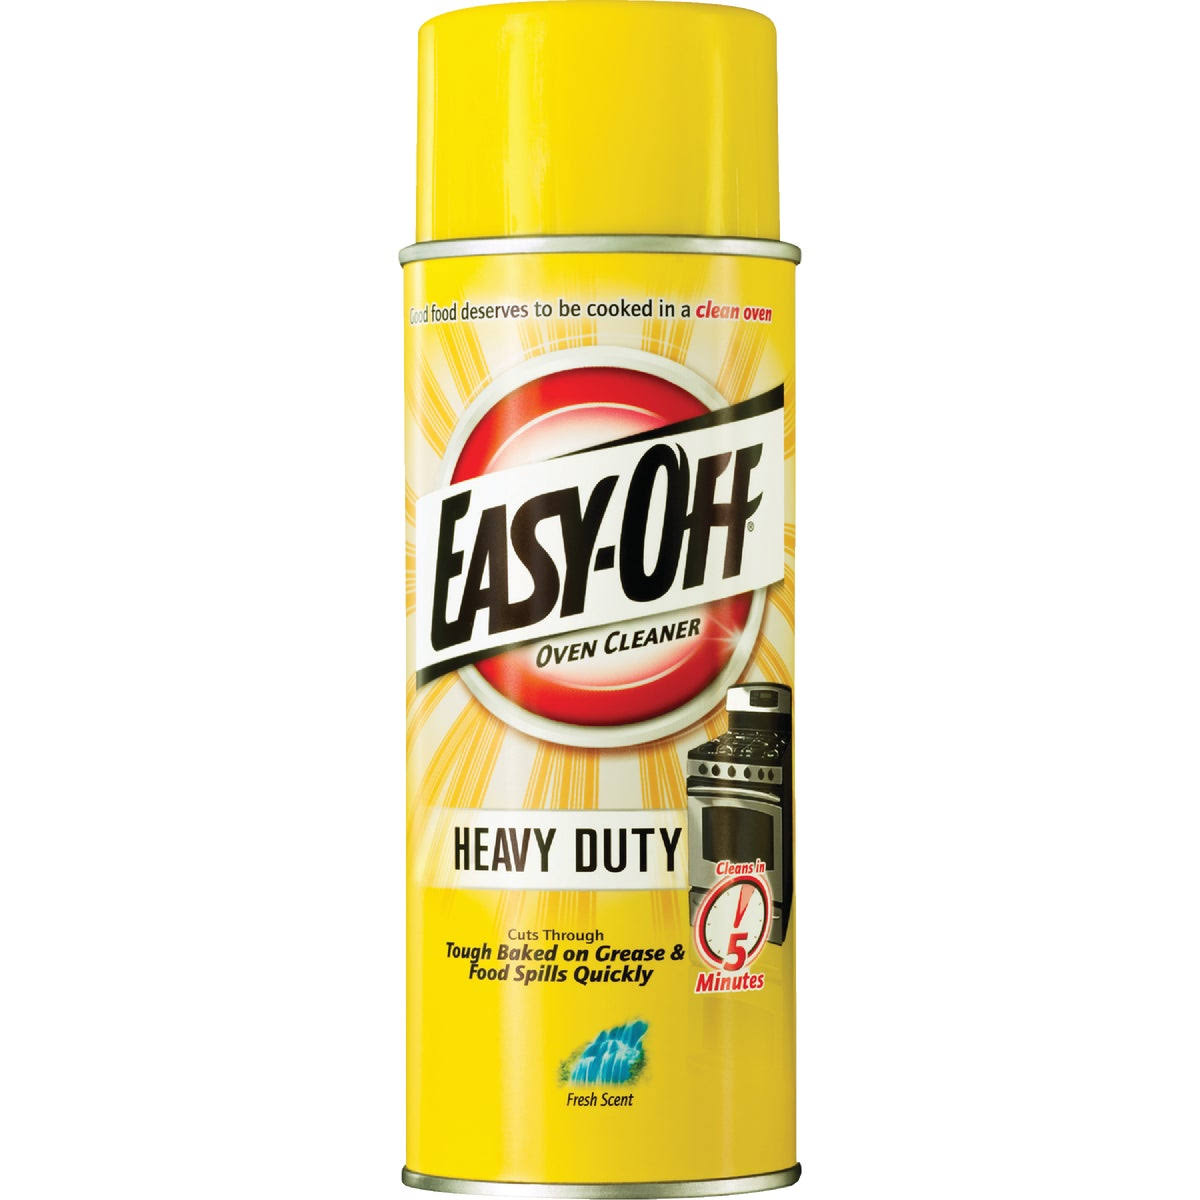 Easy Off Heavy Duty Oven Cleaner - Fresh Scent, 14.5oz